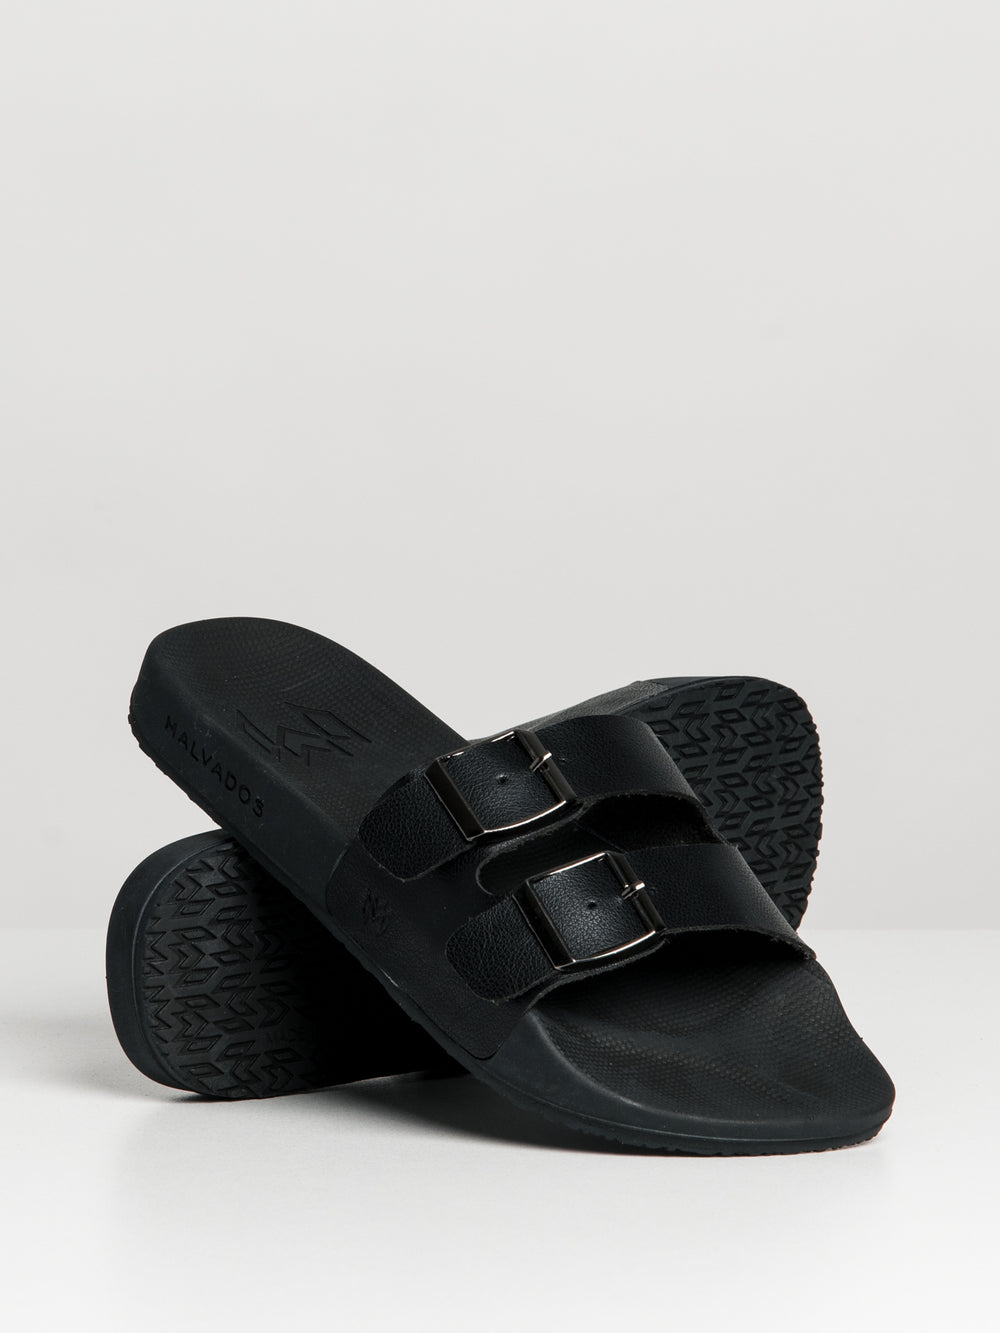 WOMENS MALVADOS OZZY BUCKLE SANDALS - CLEARANCE